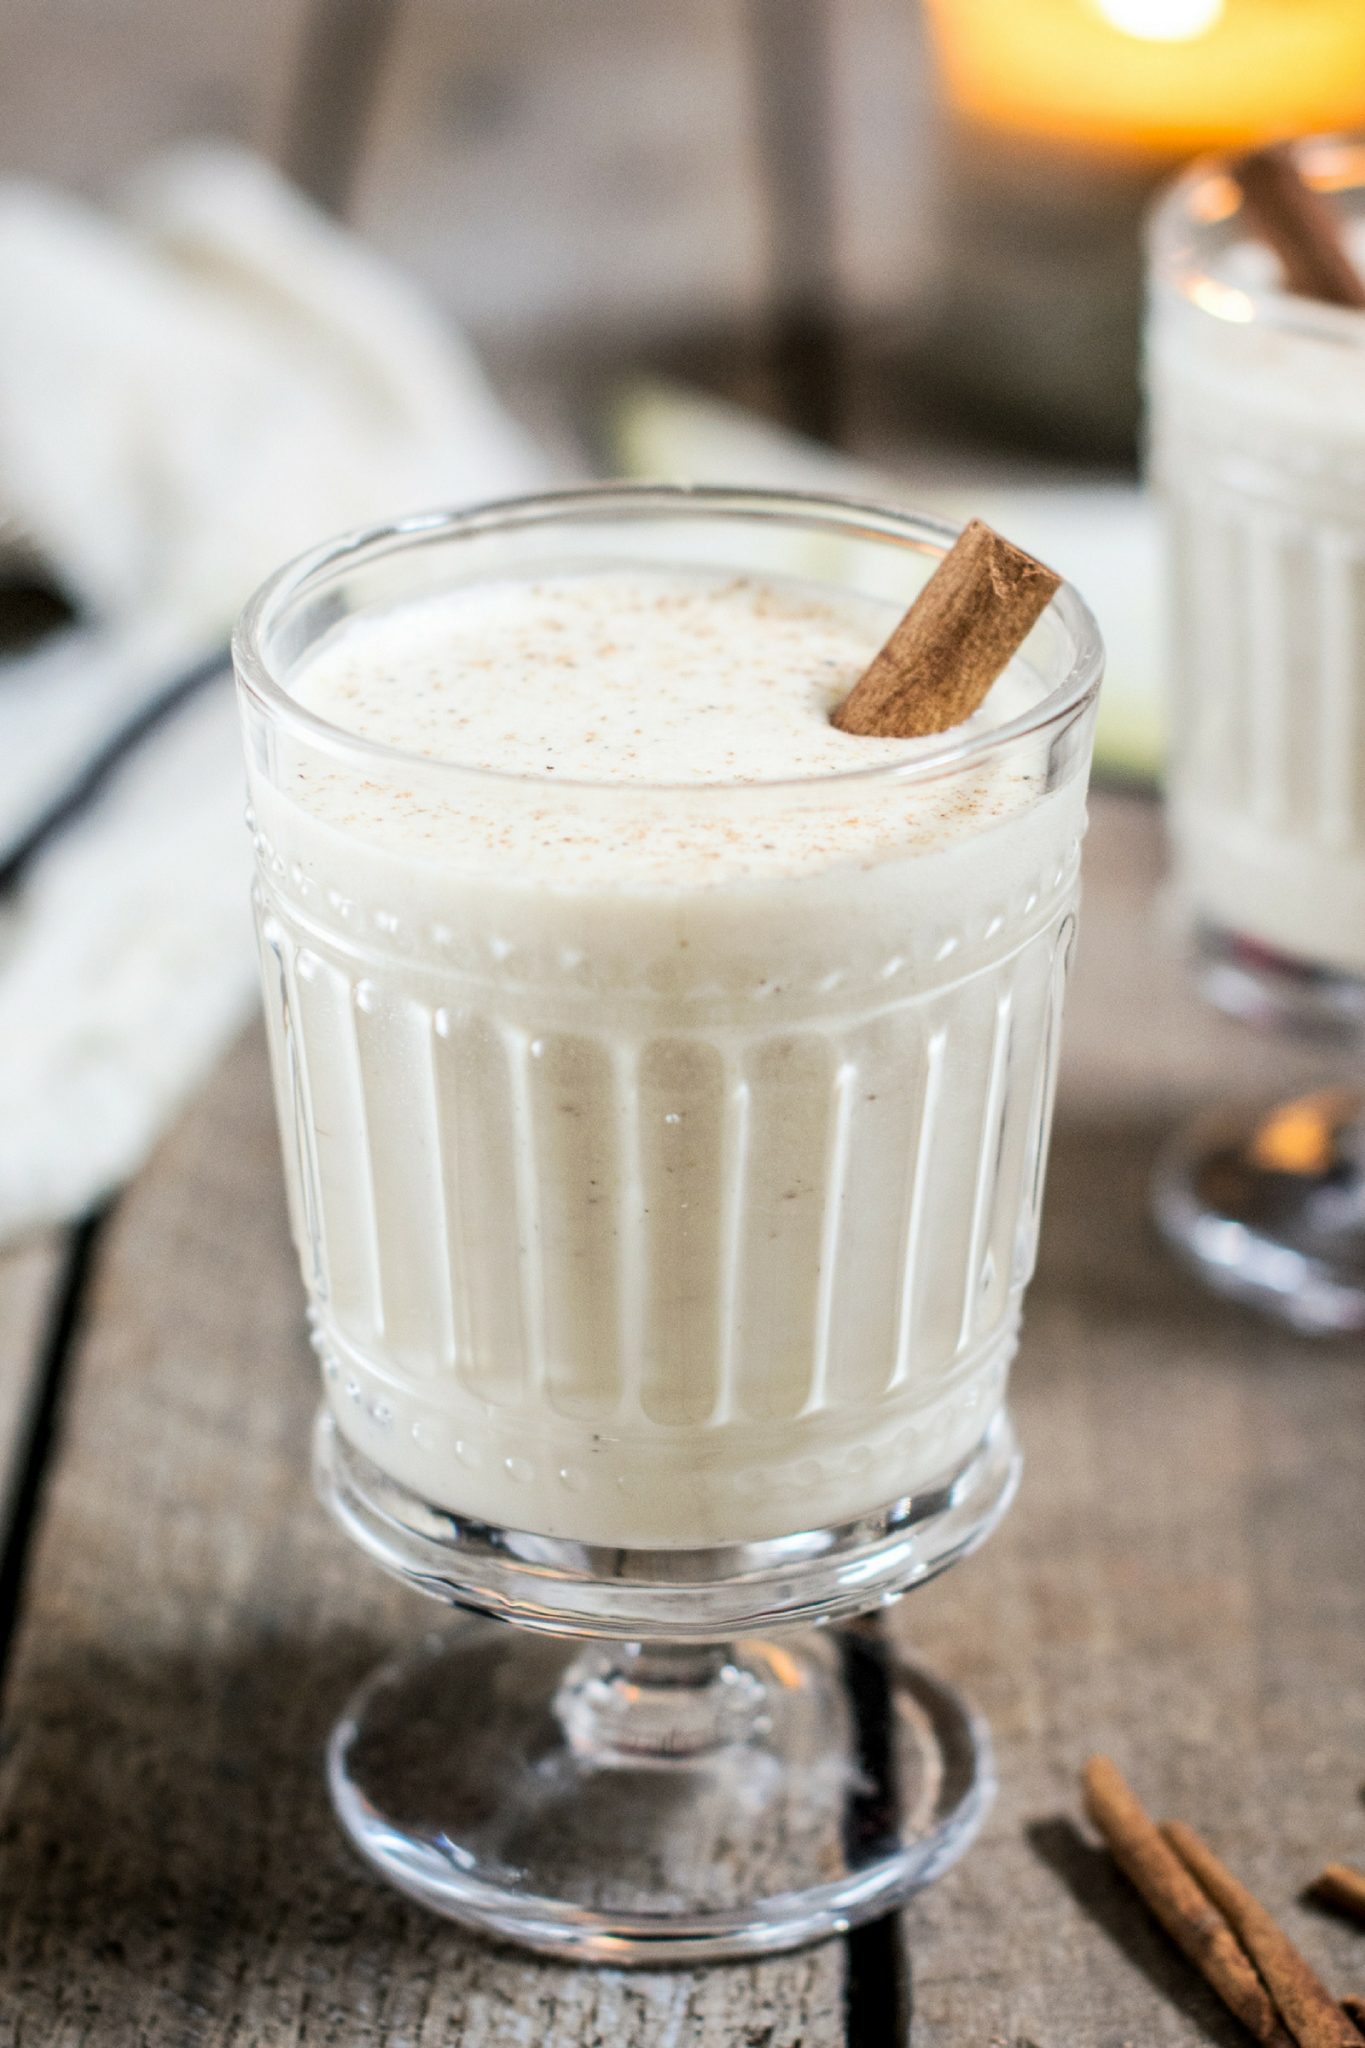 Creamy Boozy Eggnog, perfect for celebrating the holidays! Get the recipe at Little Figgy Food!